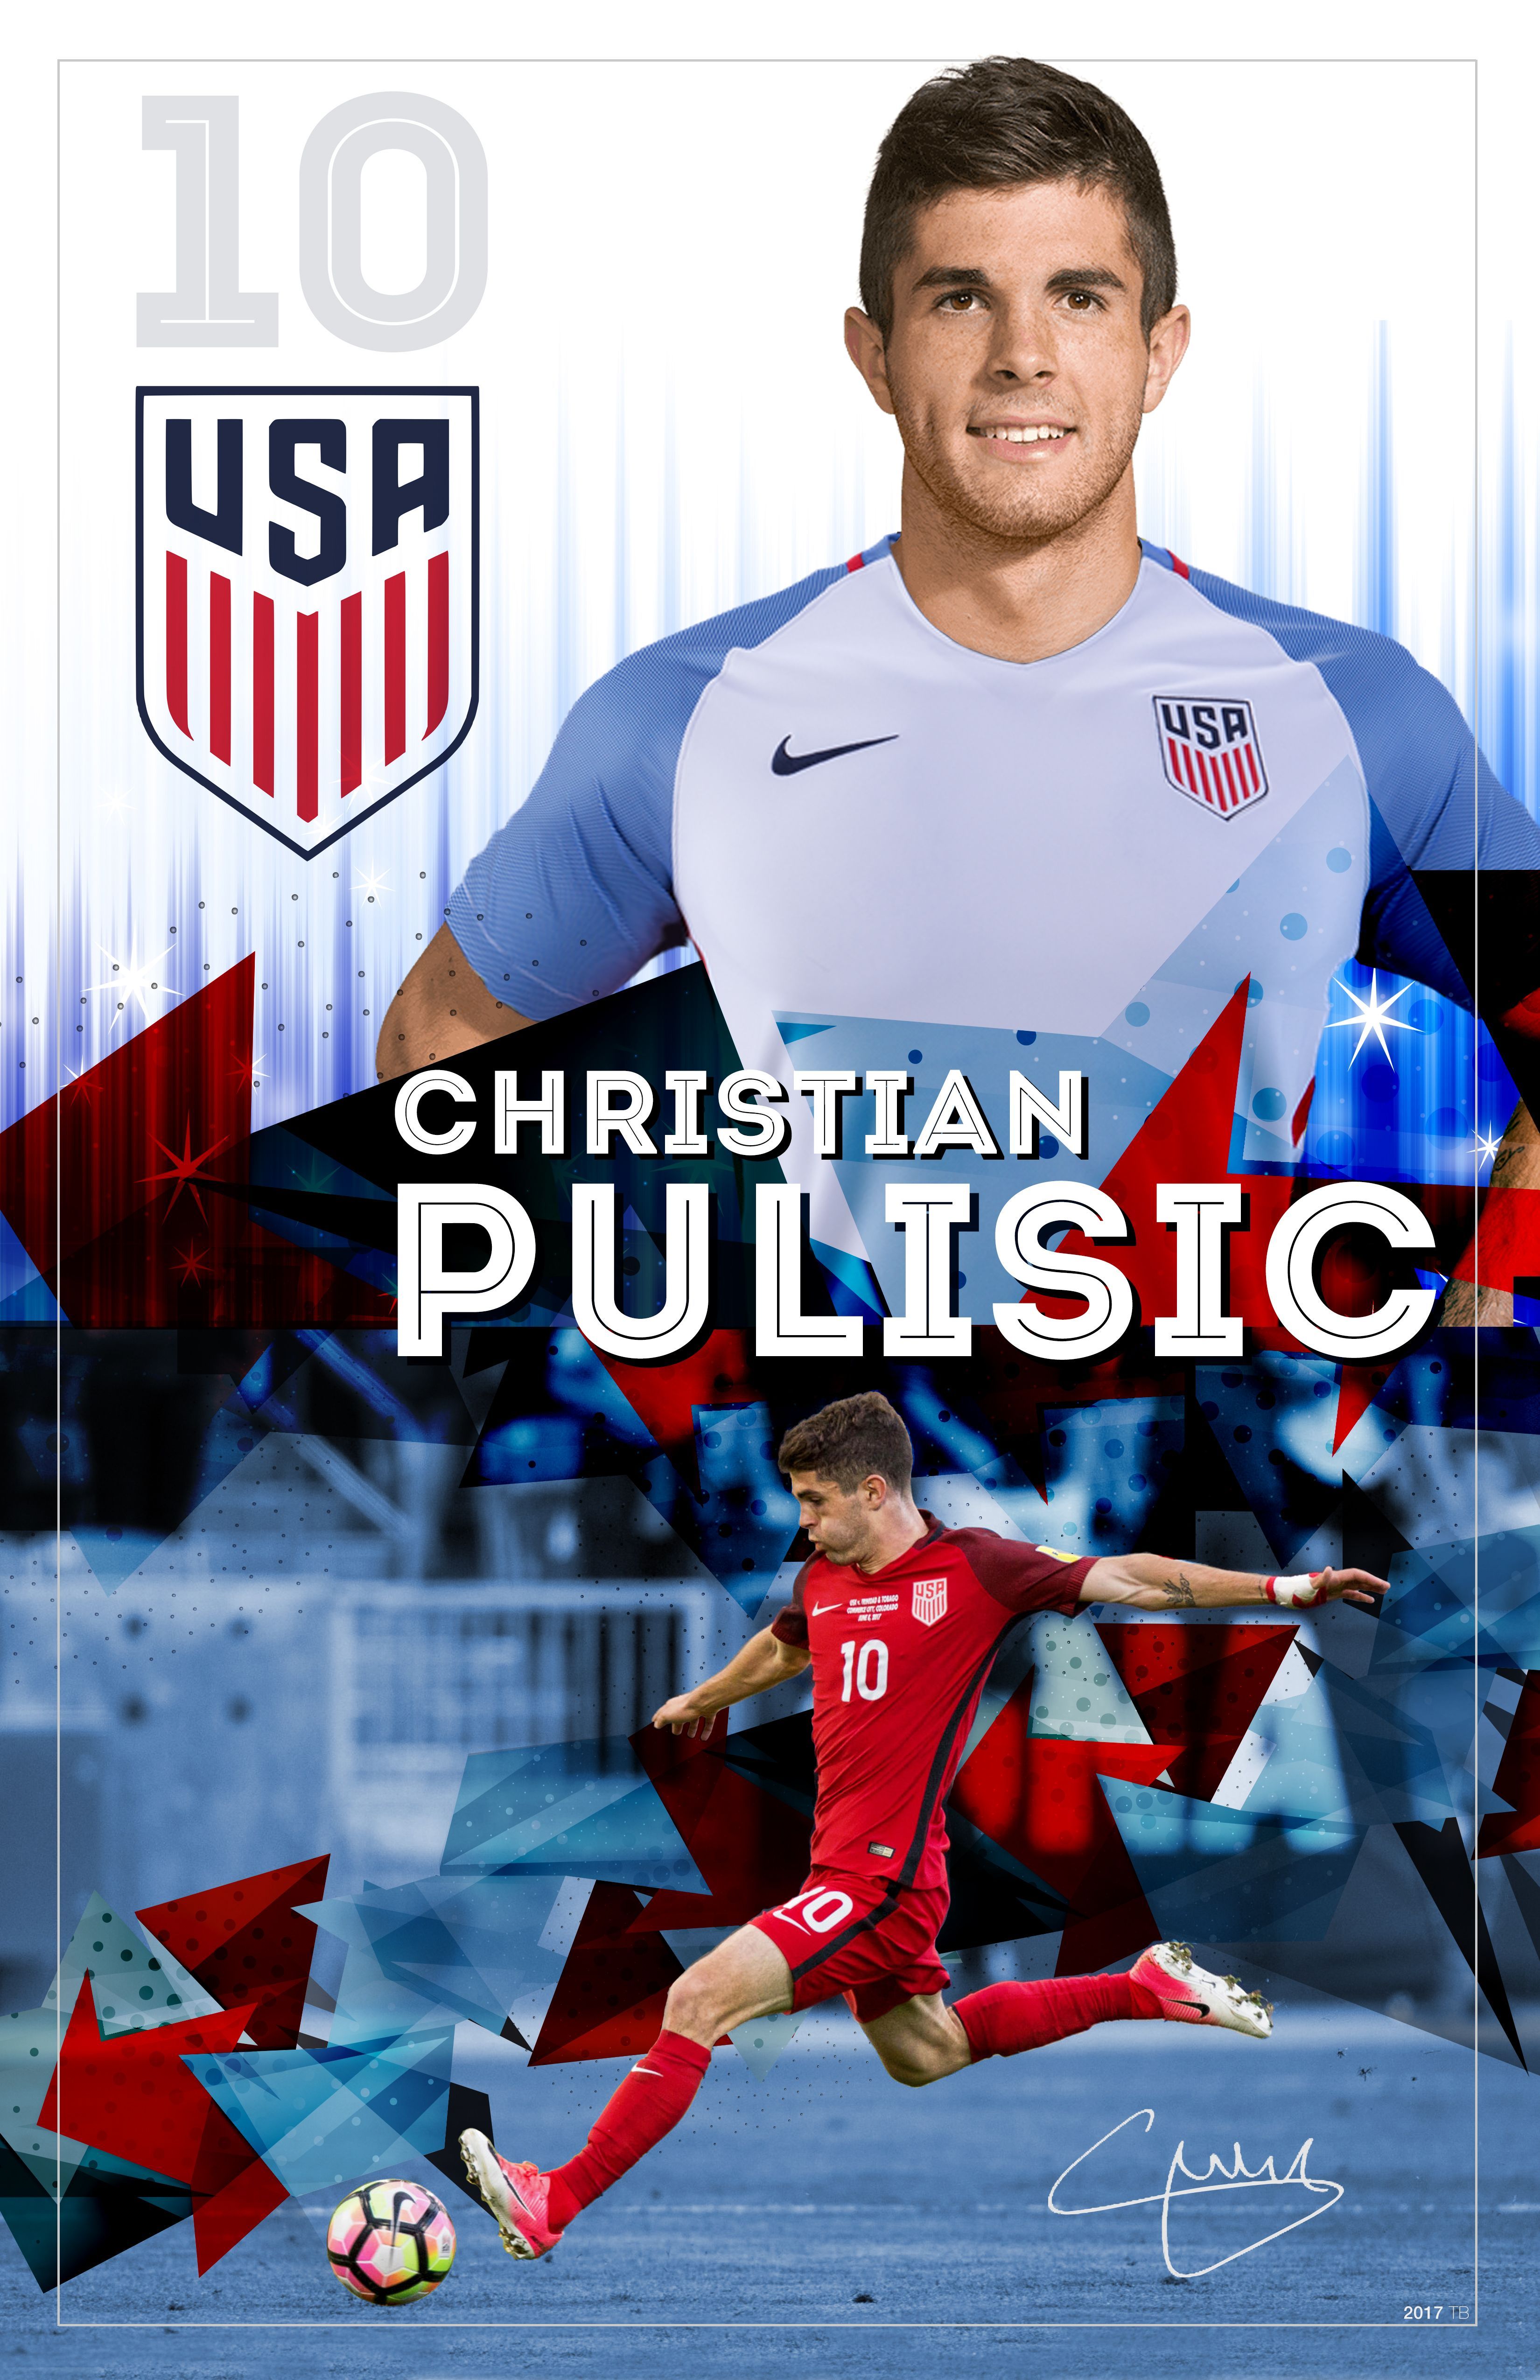 Christian Pulisic. Soccer Poster by TAYLOR BUCK. CREATIVE